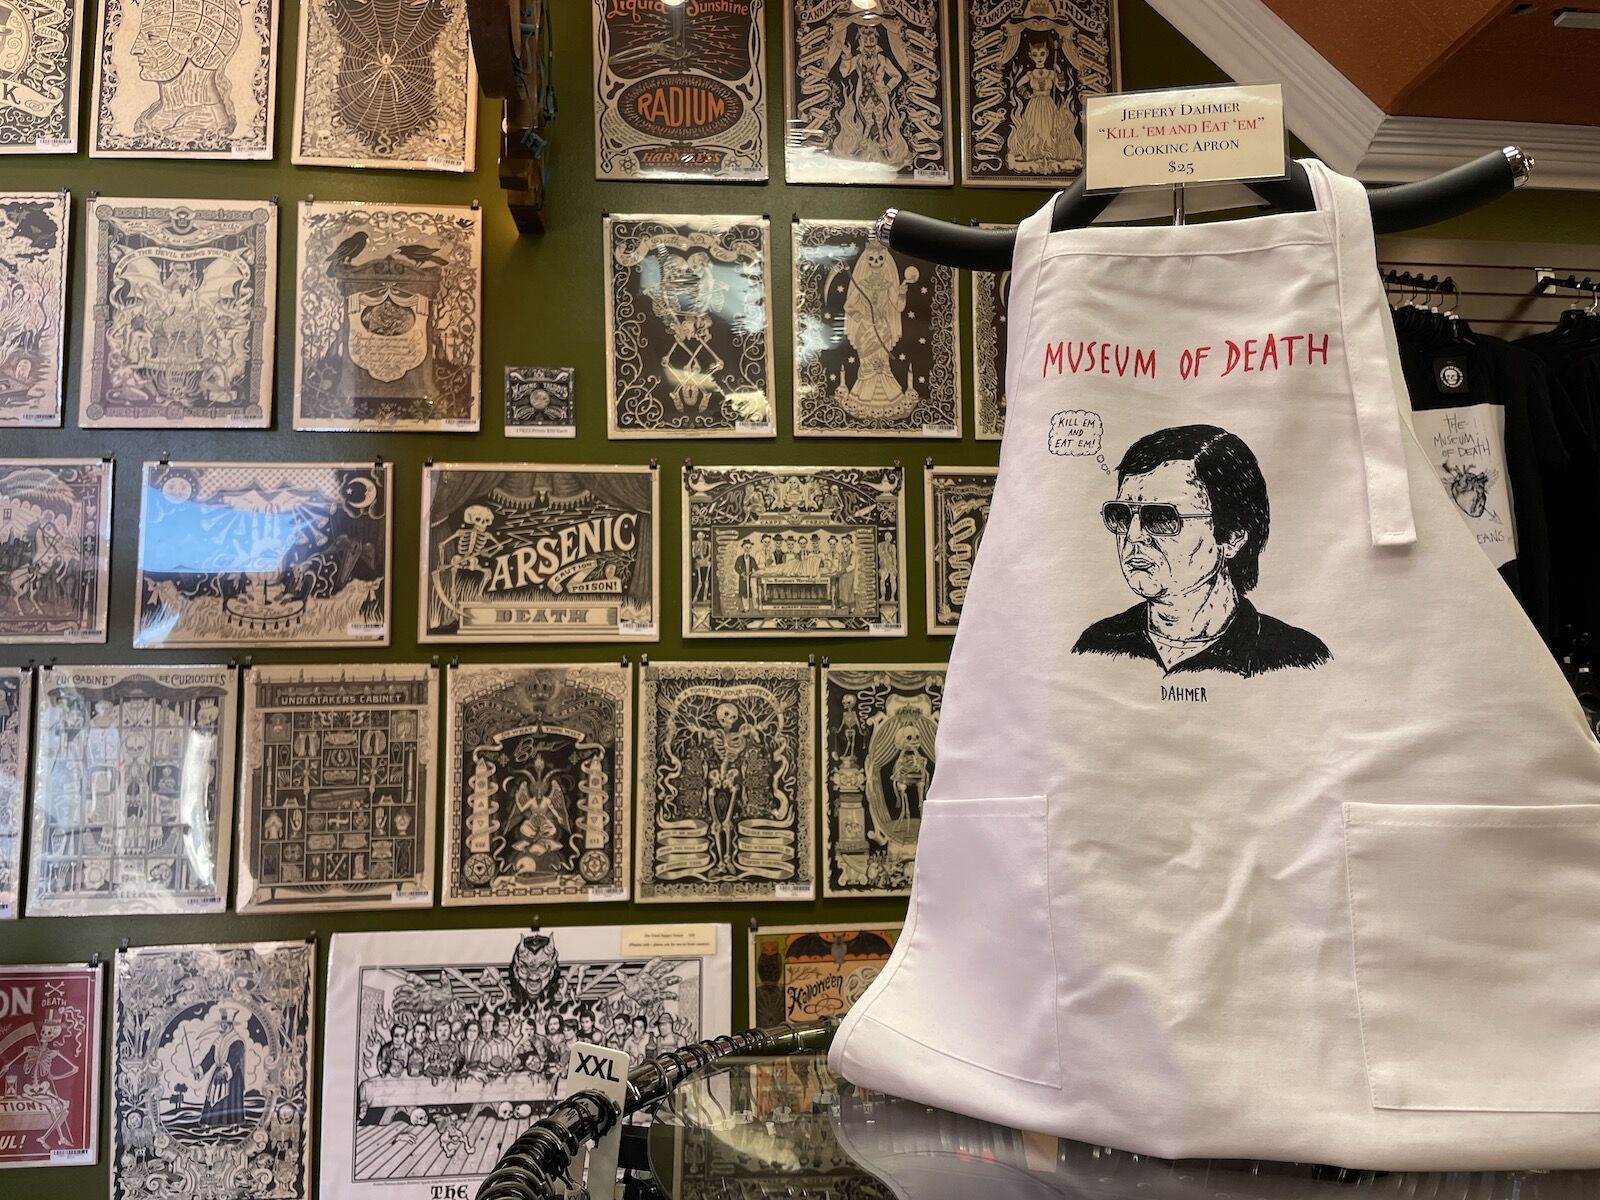 Gift shop and lobby of the Museum of Death in New Orleans